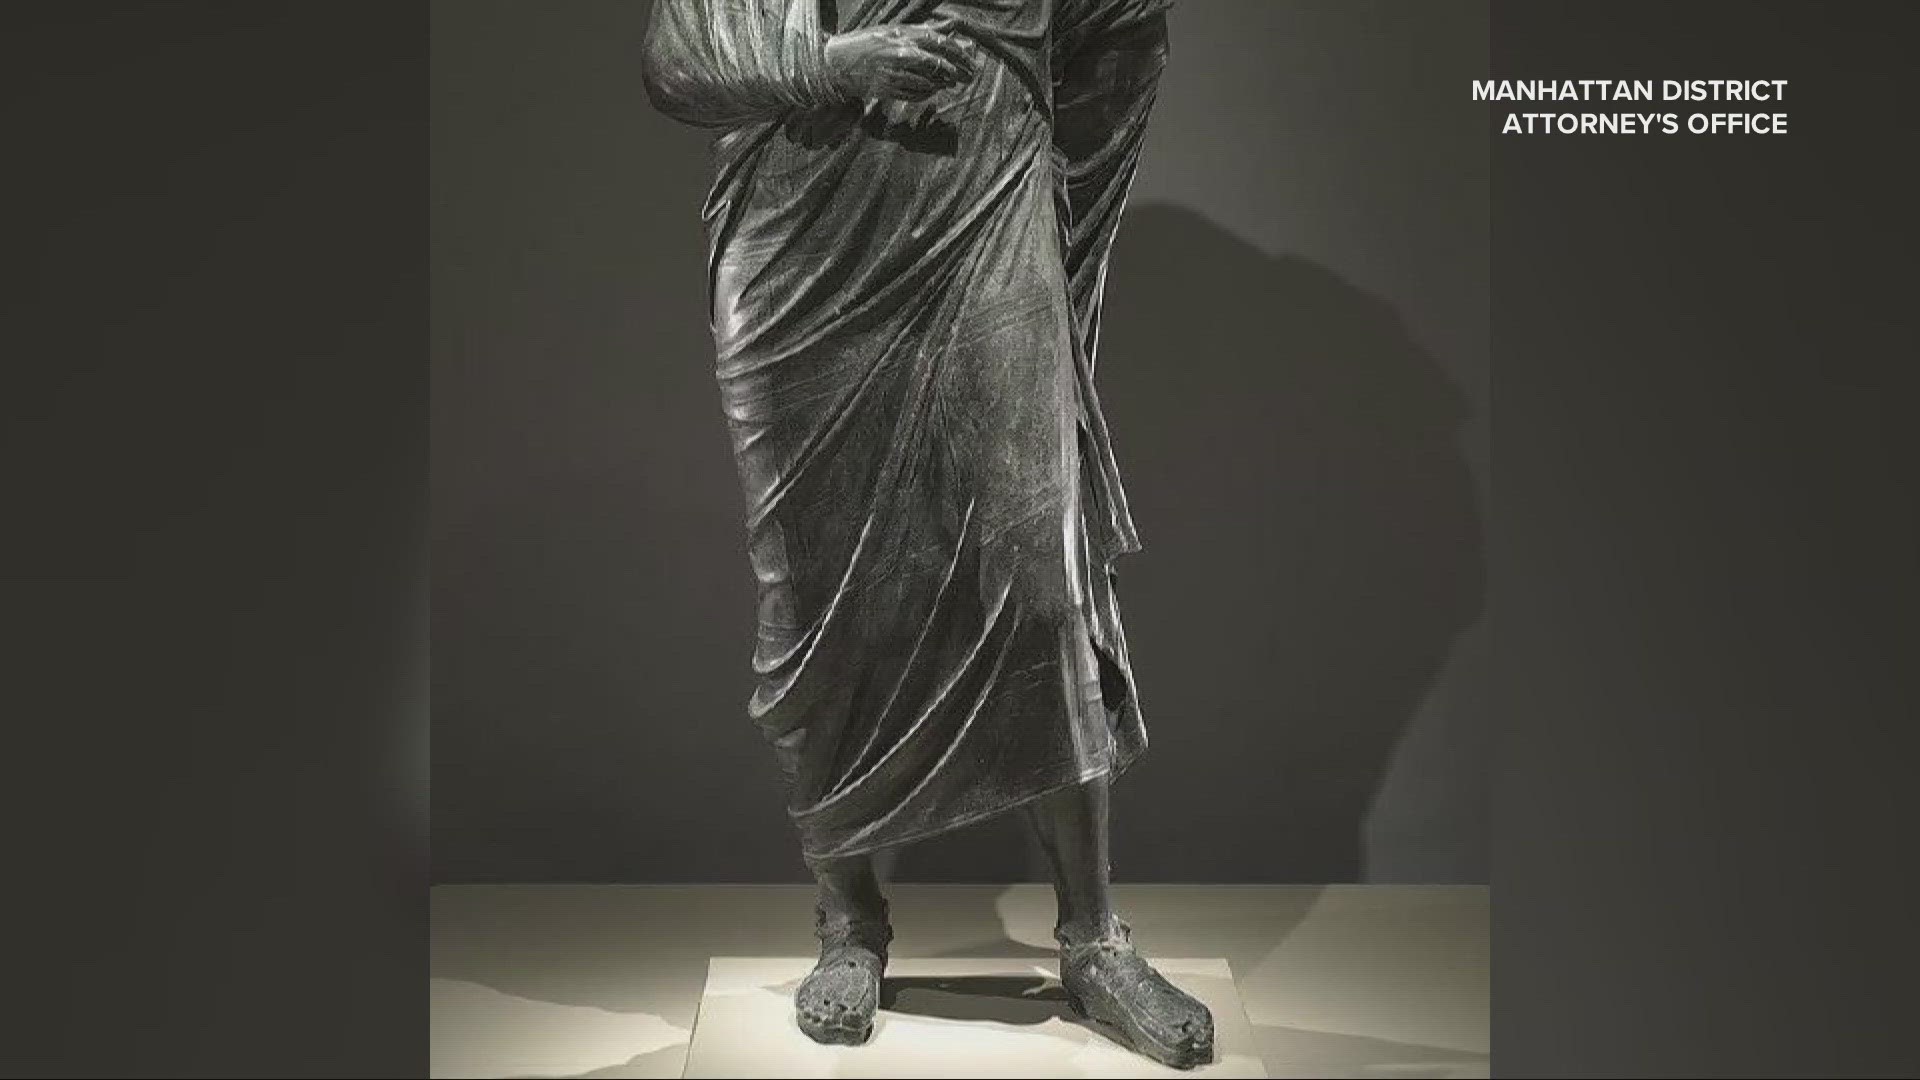 The 76-inch (1.9-meter) statue dates from A.D. 180 to 200 and is worth $20 million.